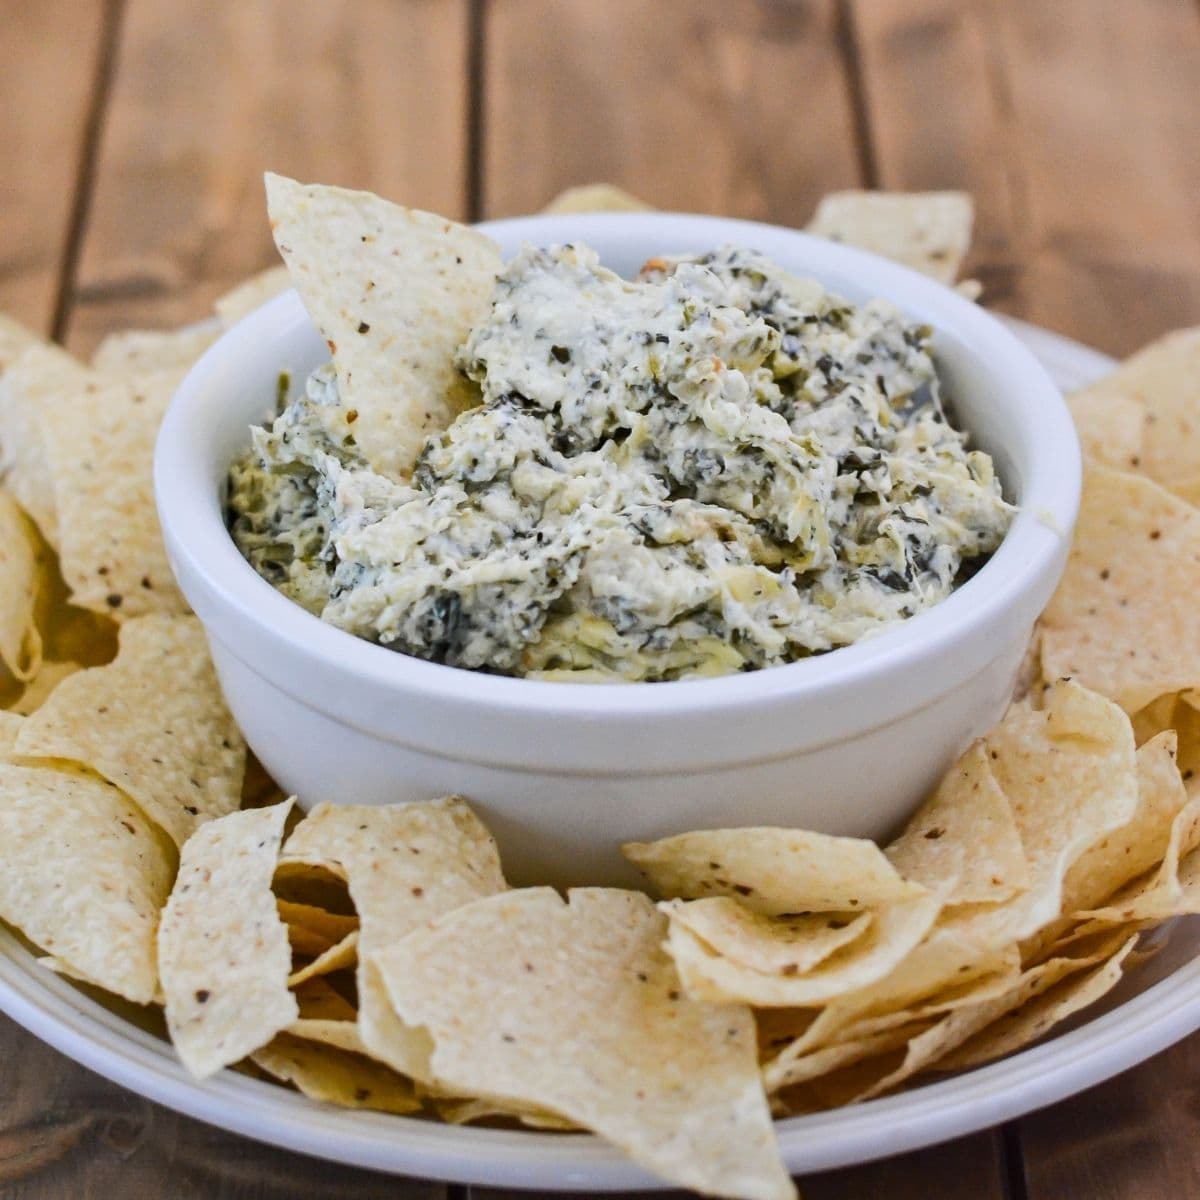 Hot artichoke and spinach dip served in a small bowl with chips.